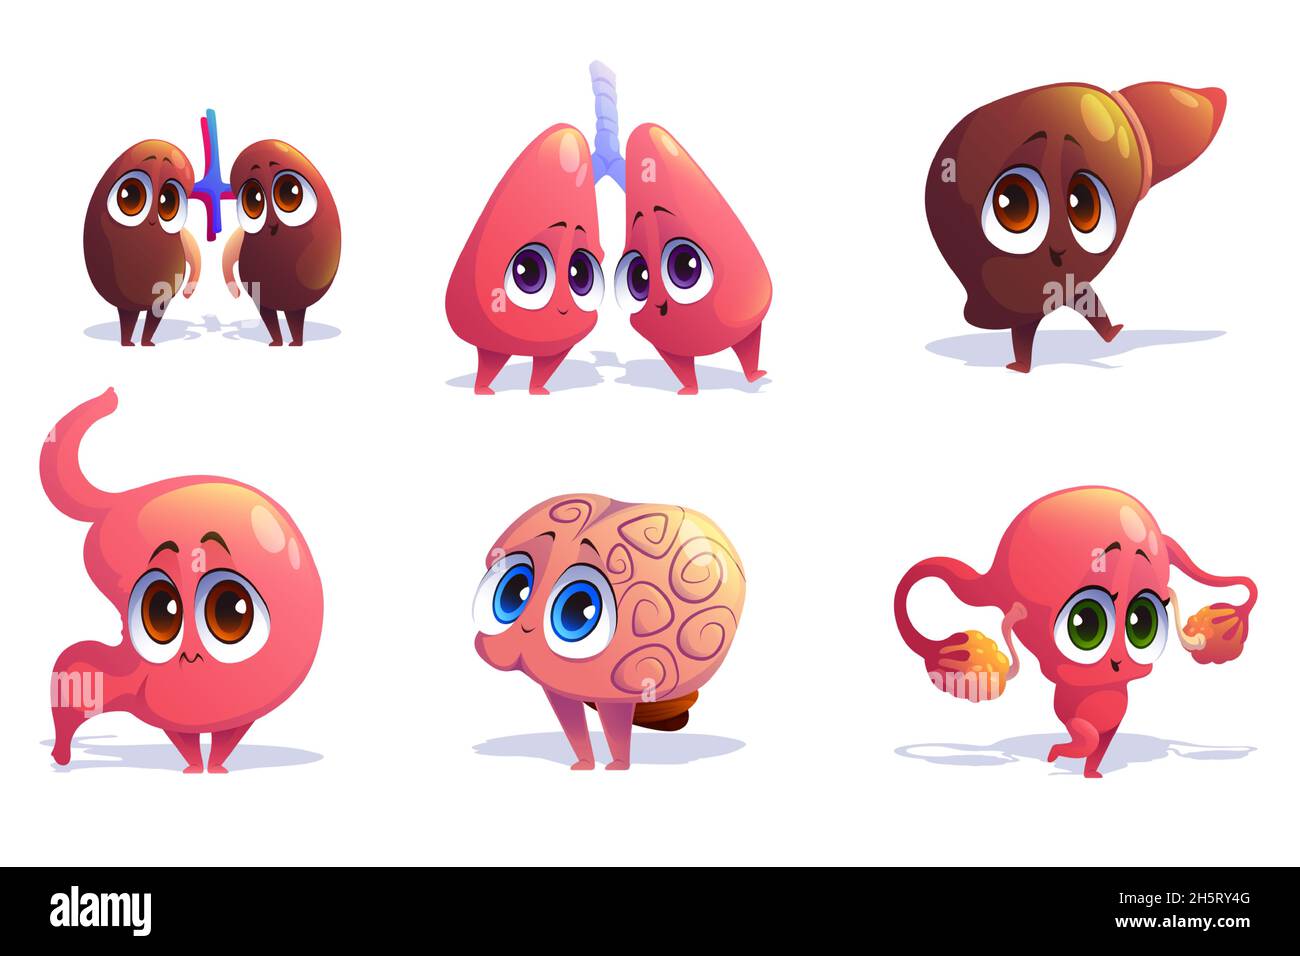 Cute characters of human internal organs isolated on white background. Vector set of cartoon funny brain, liver, kidneys, lungs, uterus with ovaries and stomach Stock Vector